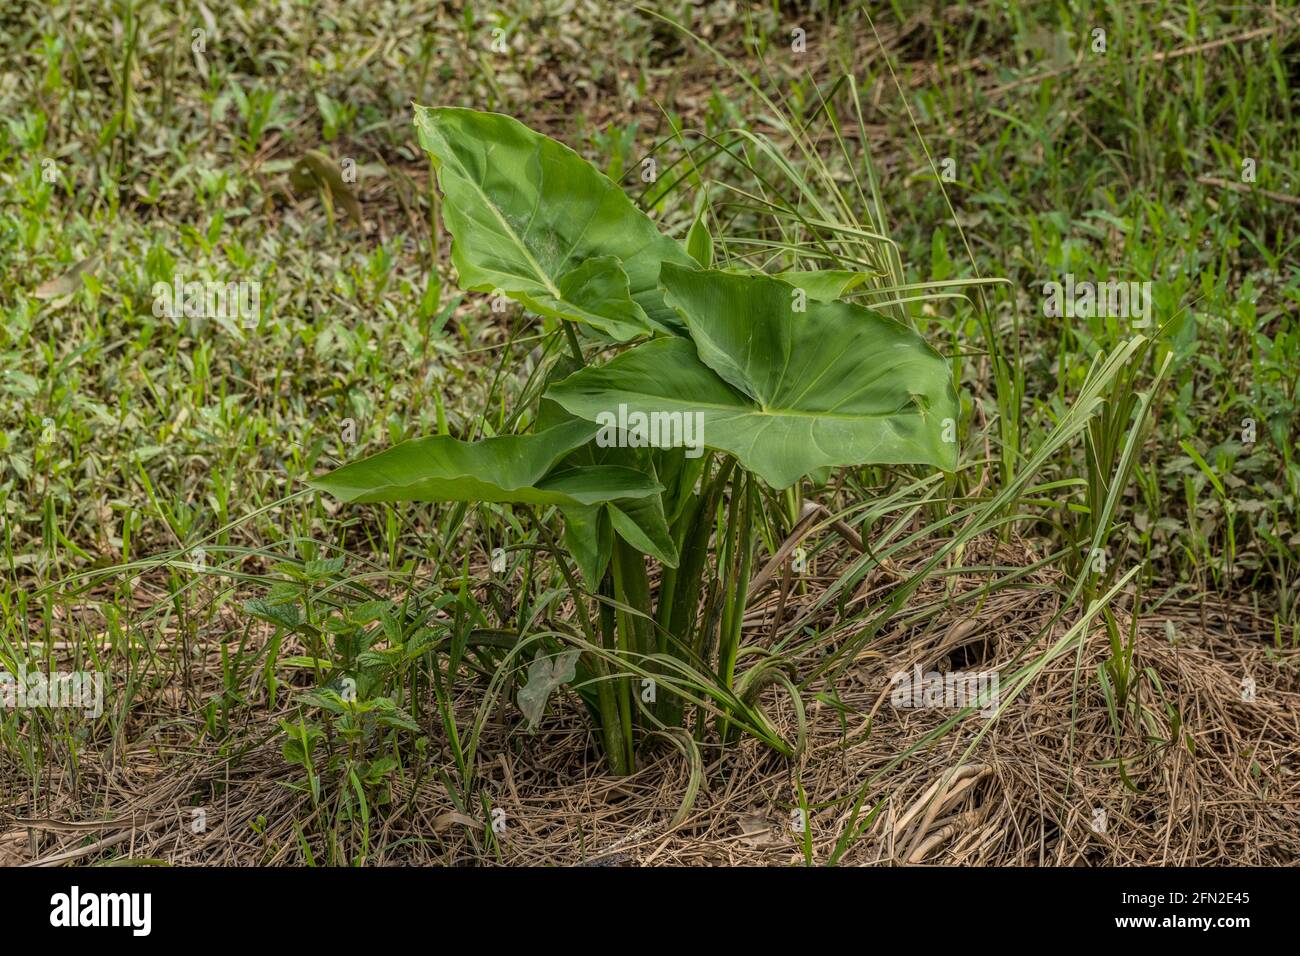 Fully emerge arrowhead plant with large foliage shaped like arrows growing in moist muddy soil at the wetlands in a waterless area on a sunny day in s Stock Photo